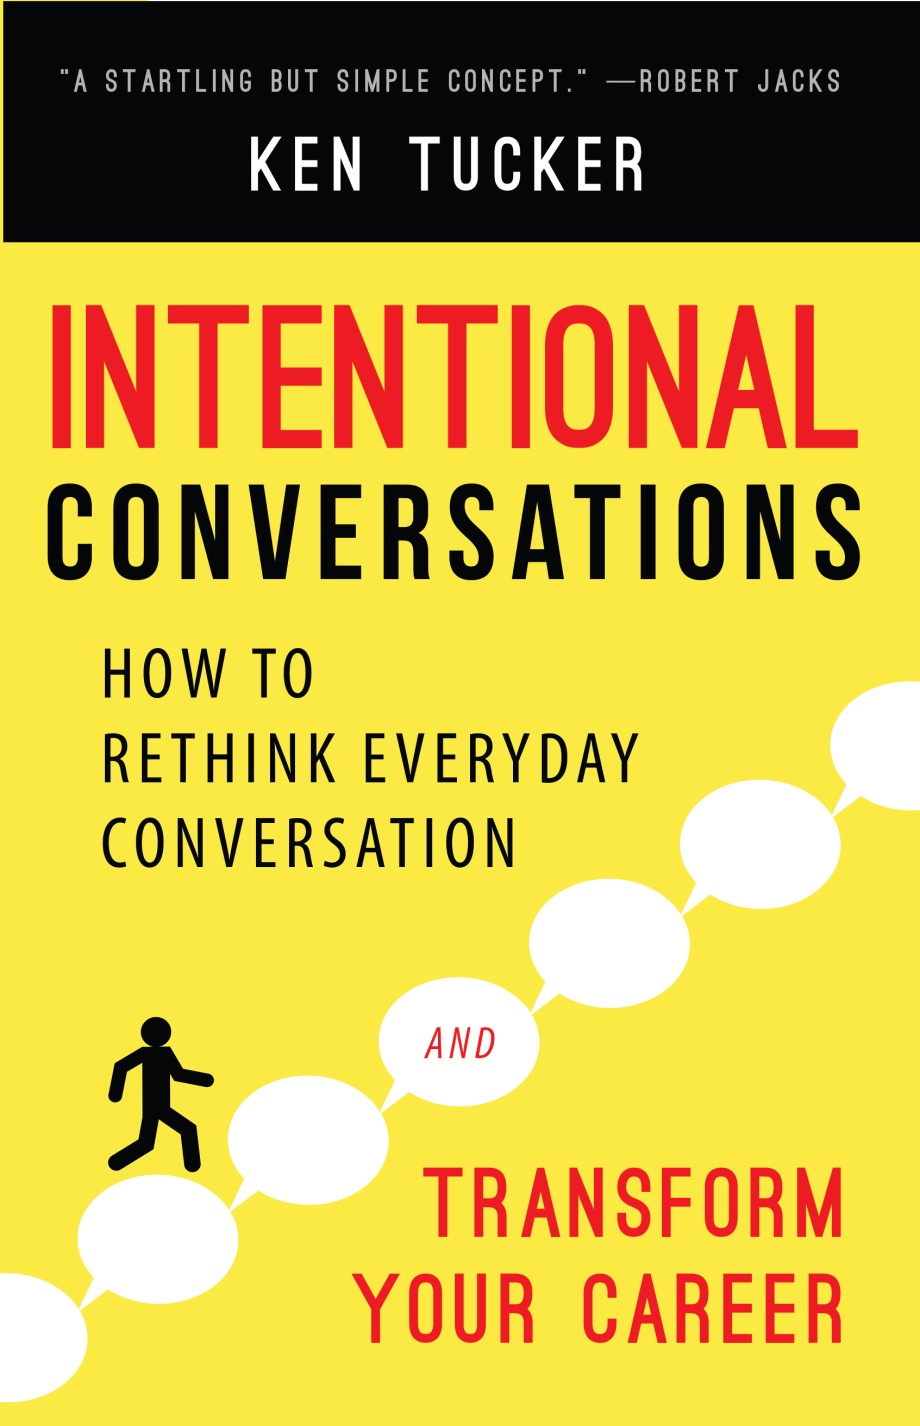 Intentional Conversations How to Rethink Everyday Conversation and Transform Your Career